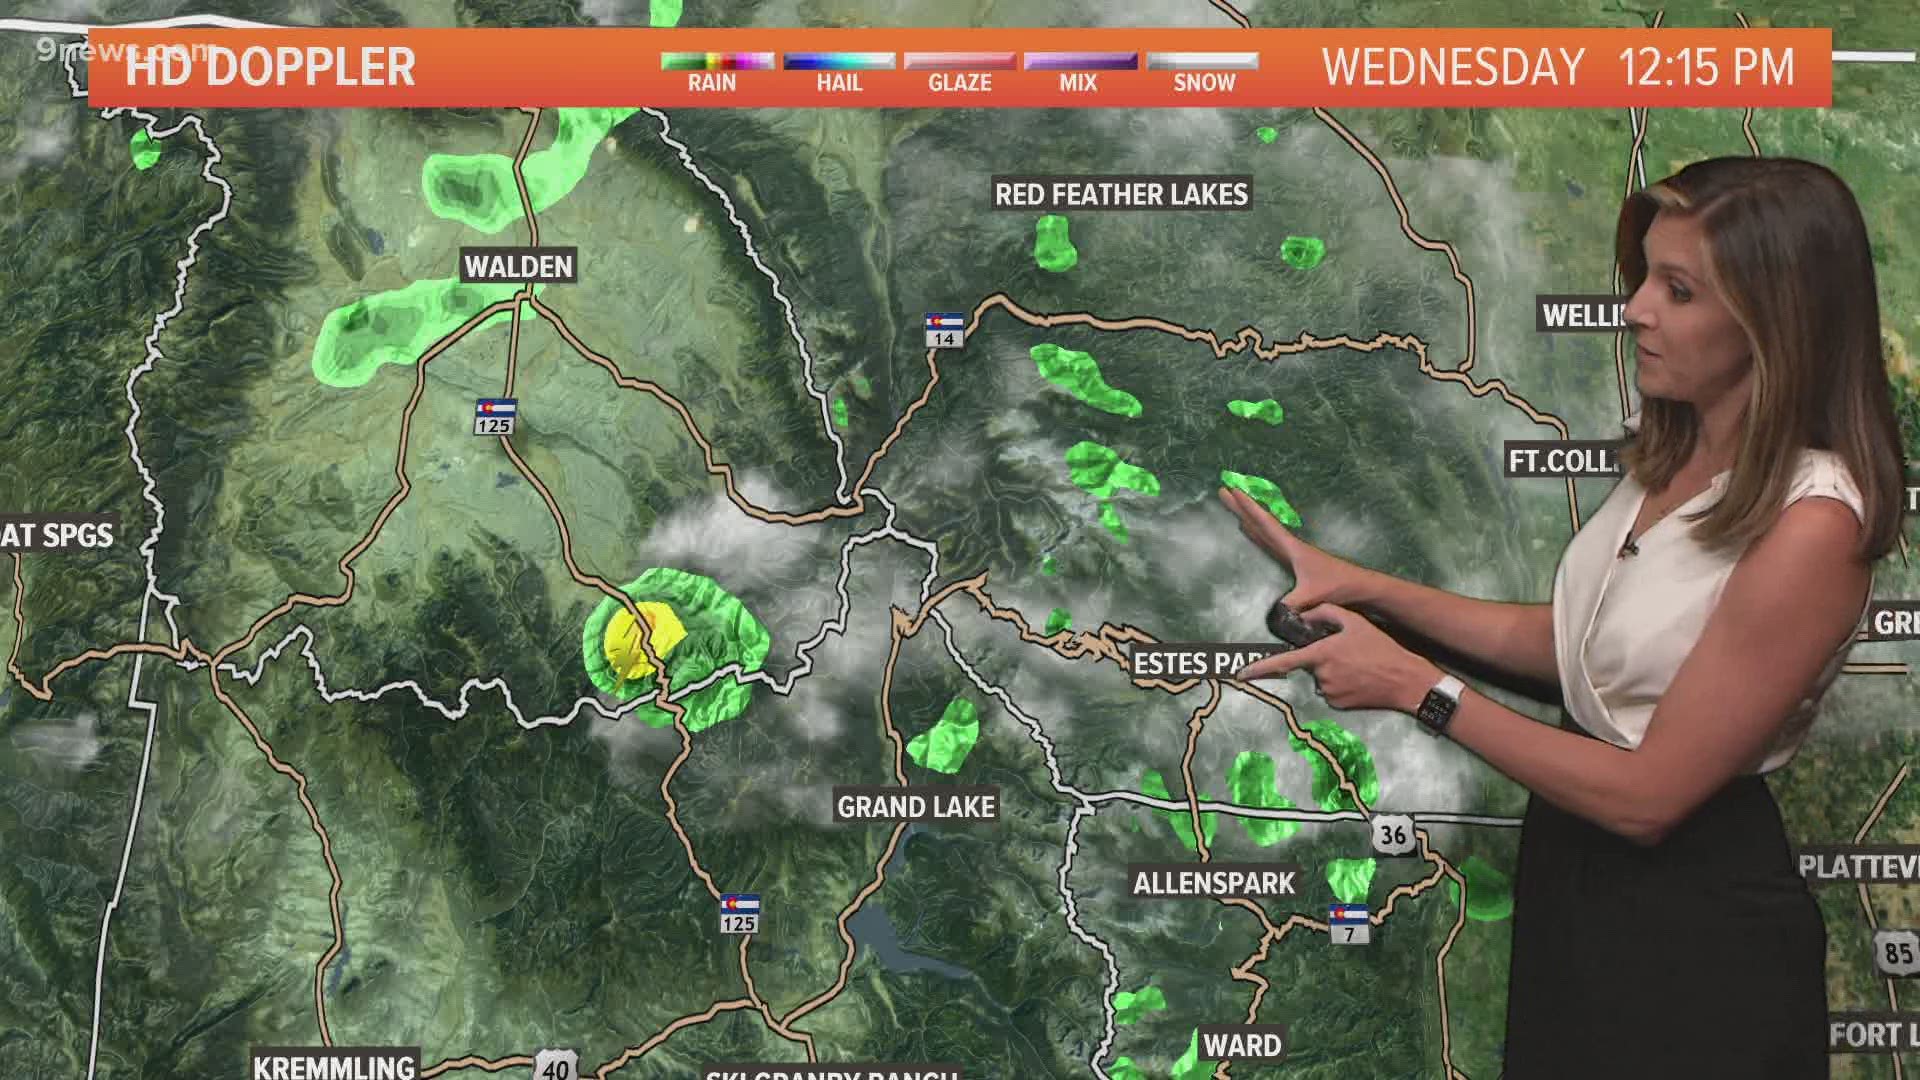 Storms will come off the foothills after 2 p.m. and will intensify as they move east.